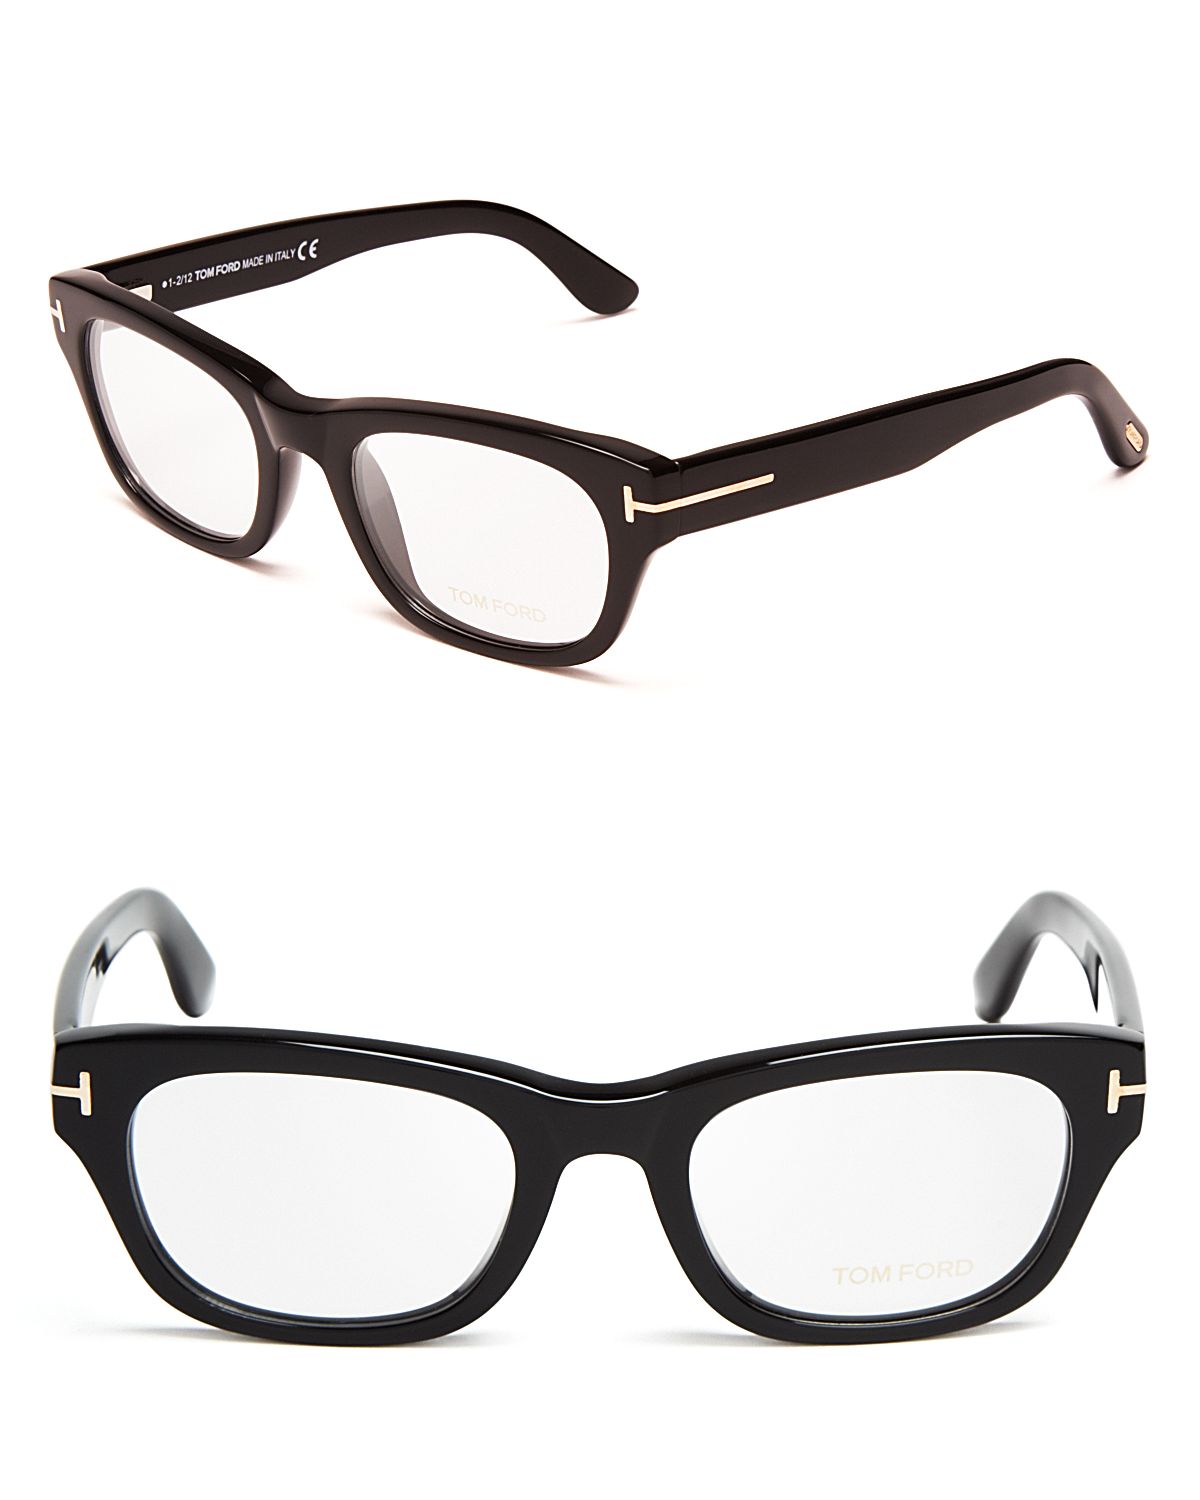 Tom ford Thick Rectangle Optical Frames in Black | Lyst